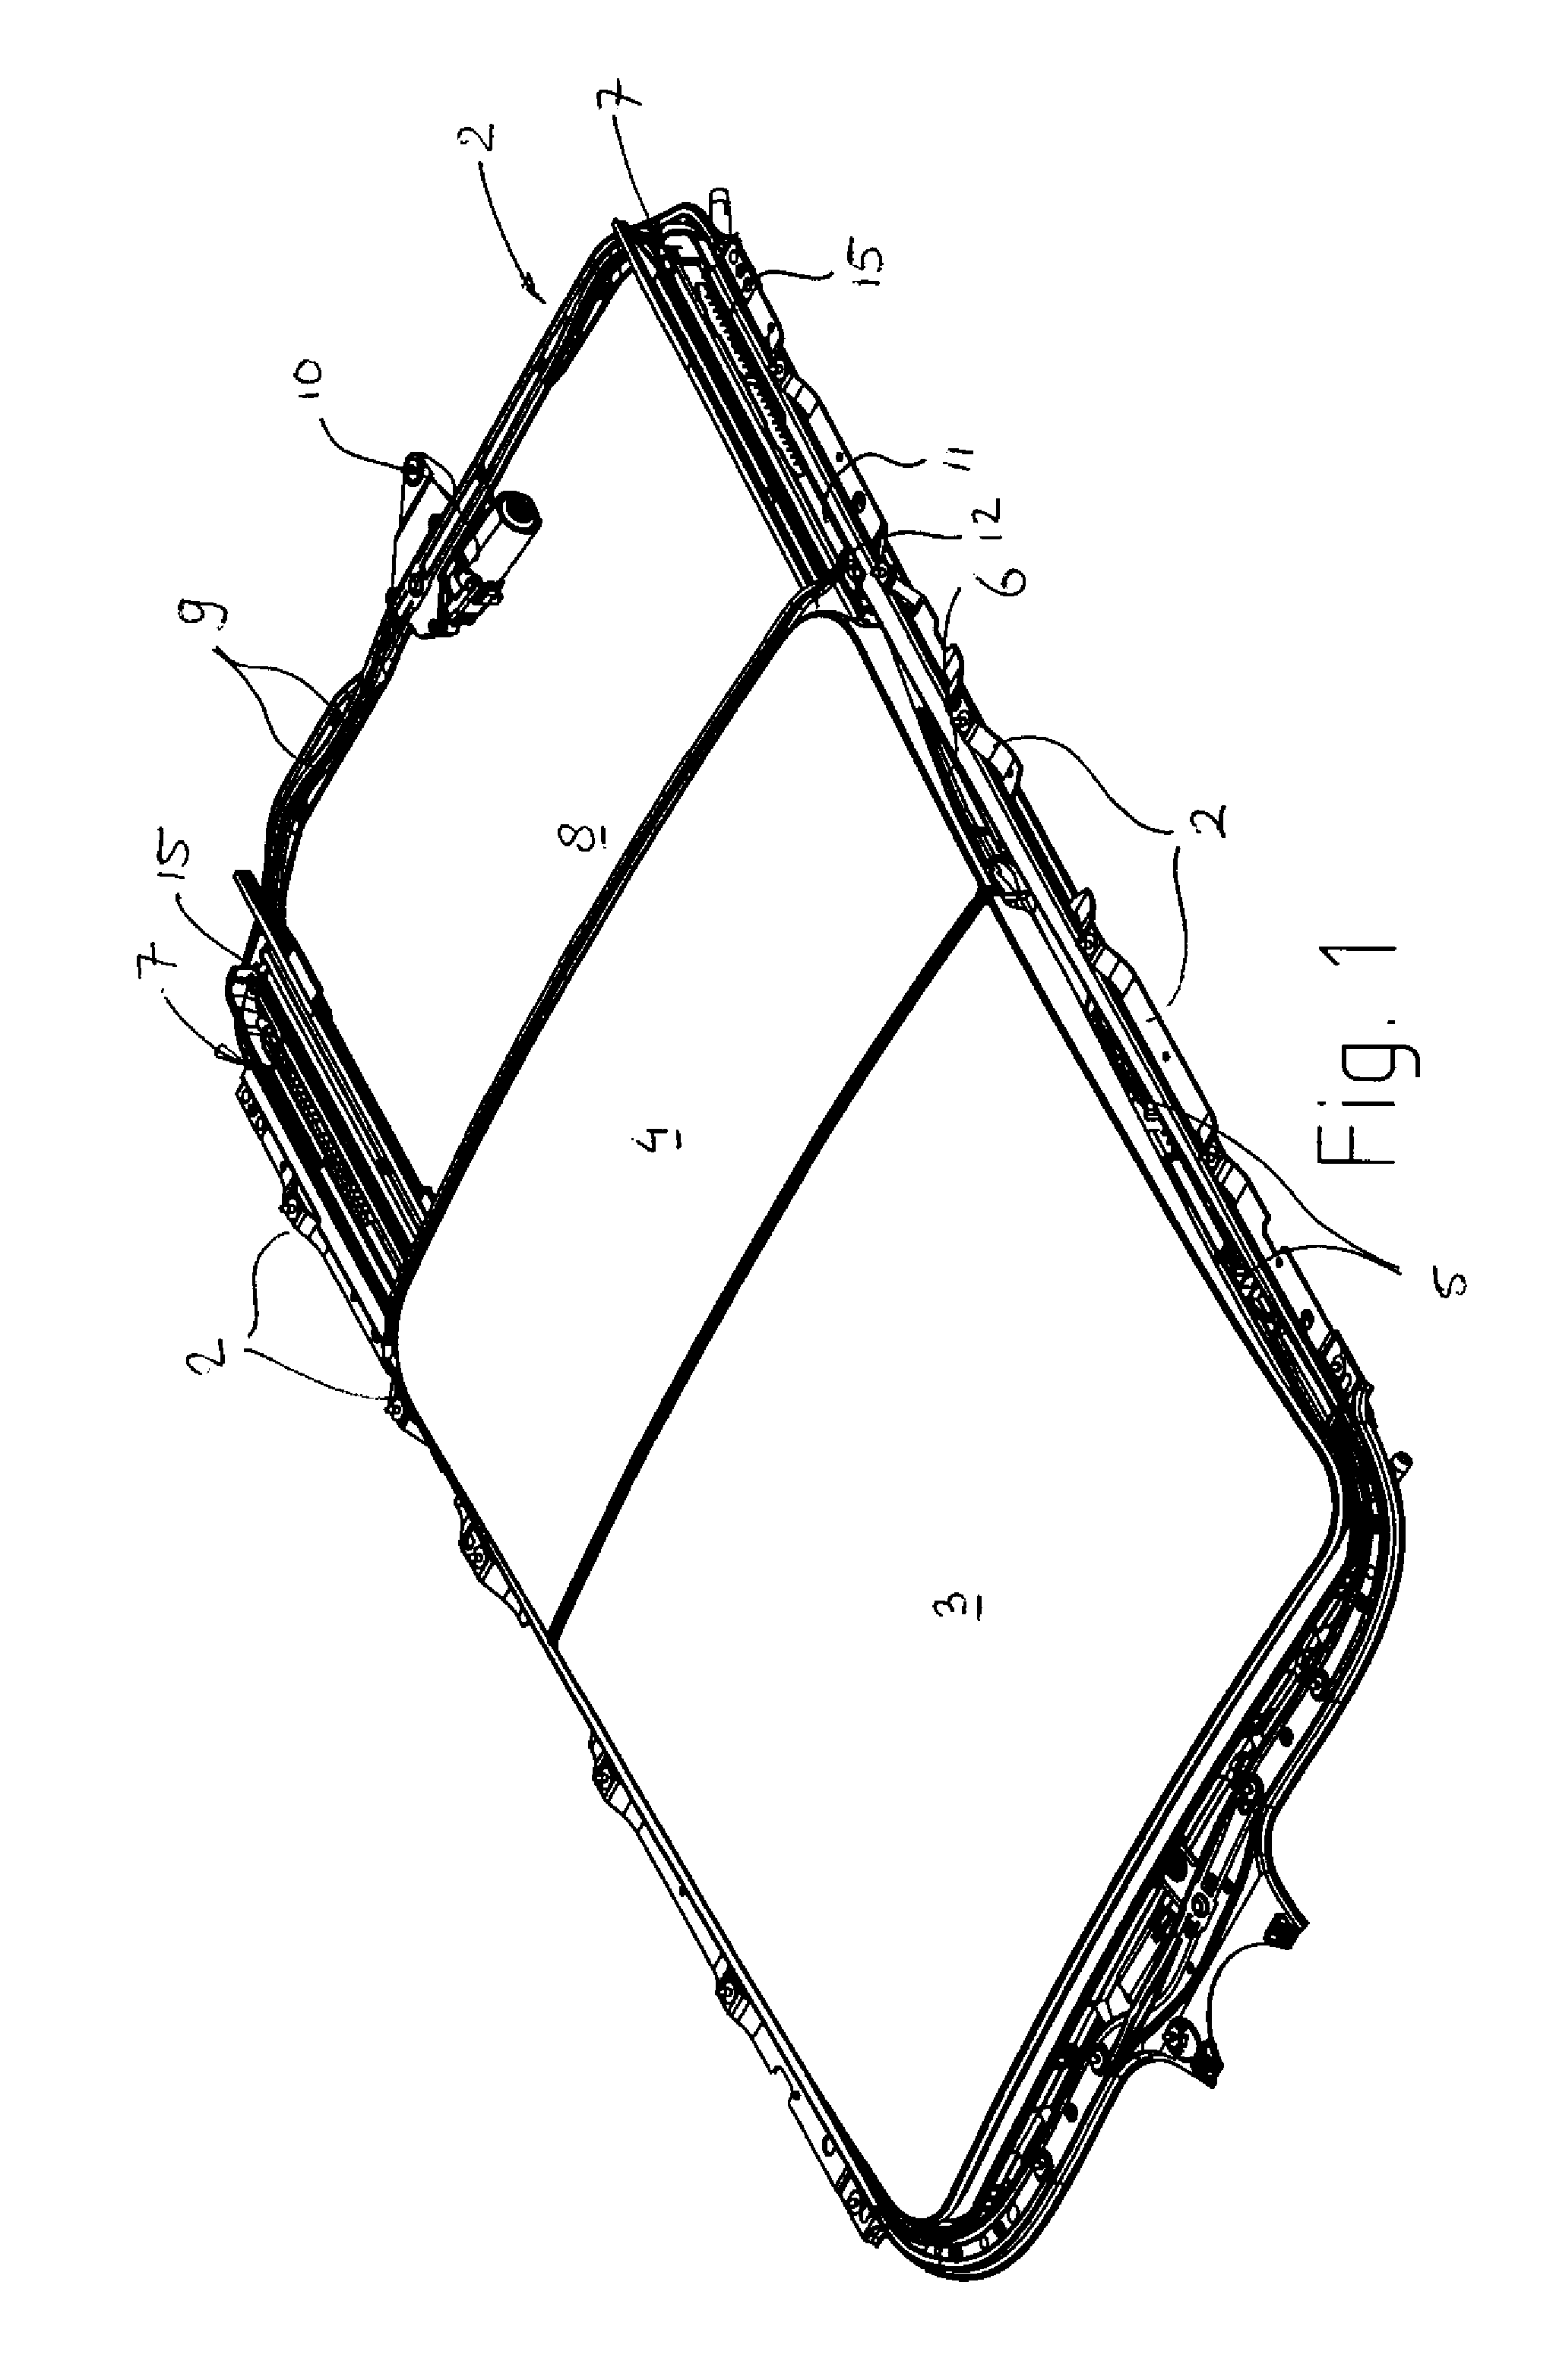 Roof assembly and method of mounting a sieve member